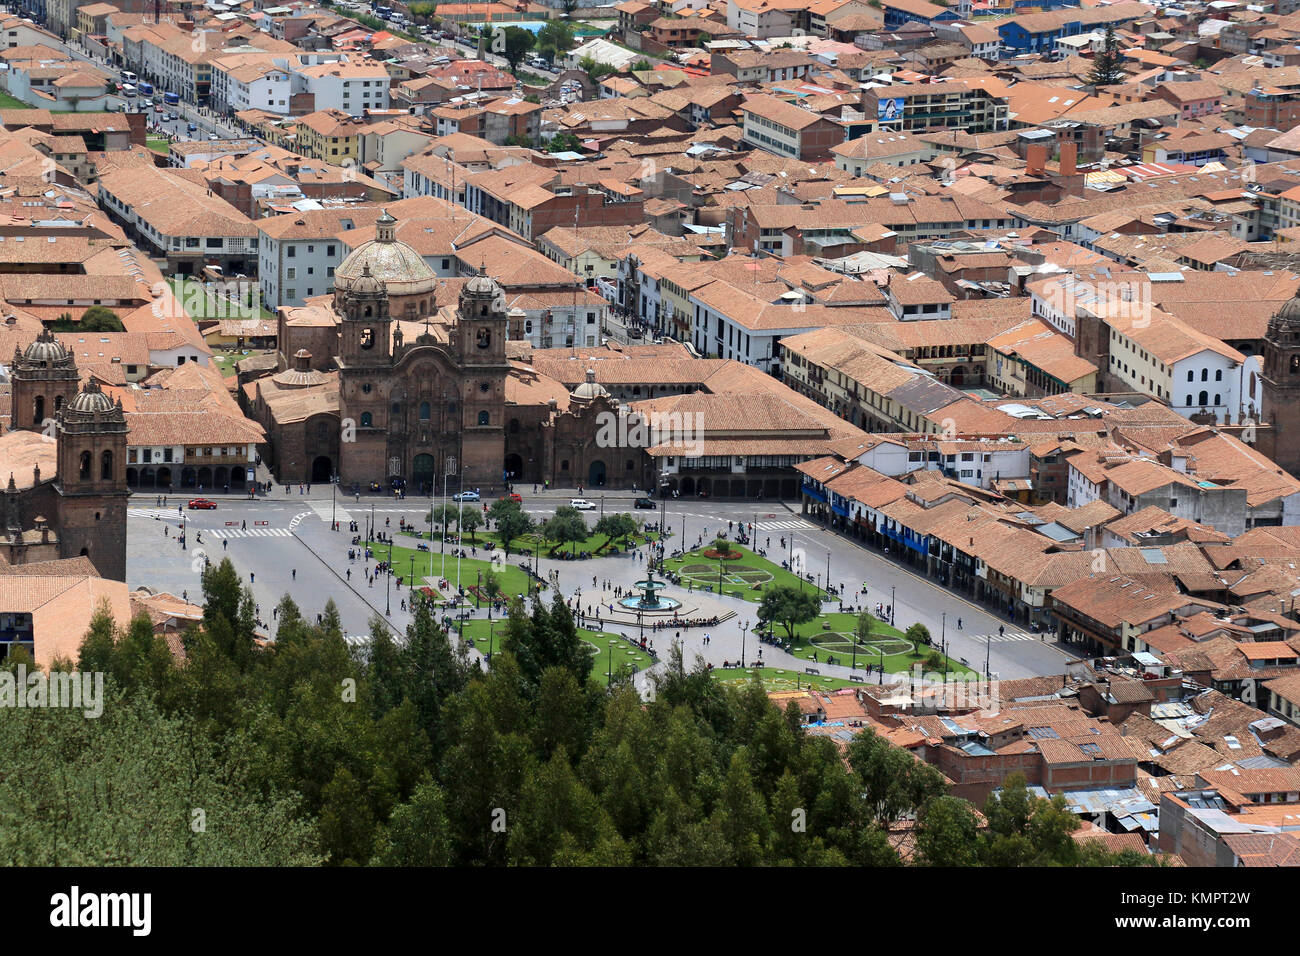 Cusco ( Peru) November, 21st 2015; View of the city of Cusco from the Archeological site of Sacsayhuaman Plaza des armas with cathŽdral and religious buildings of the city Credit: Sebastien Lapeyrere/Alamy Live News. Stock Photo